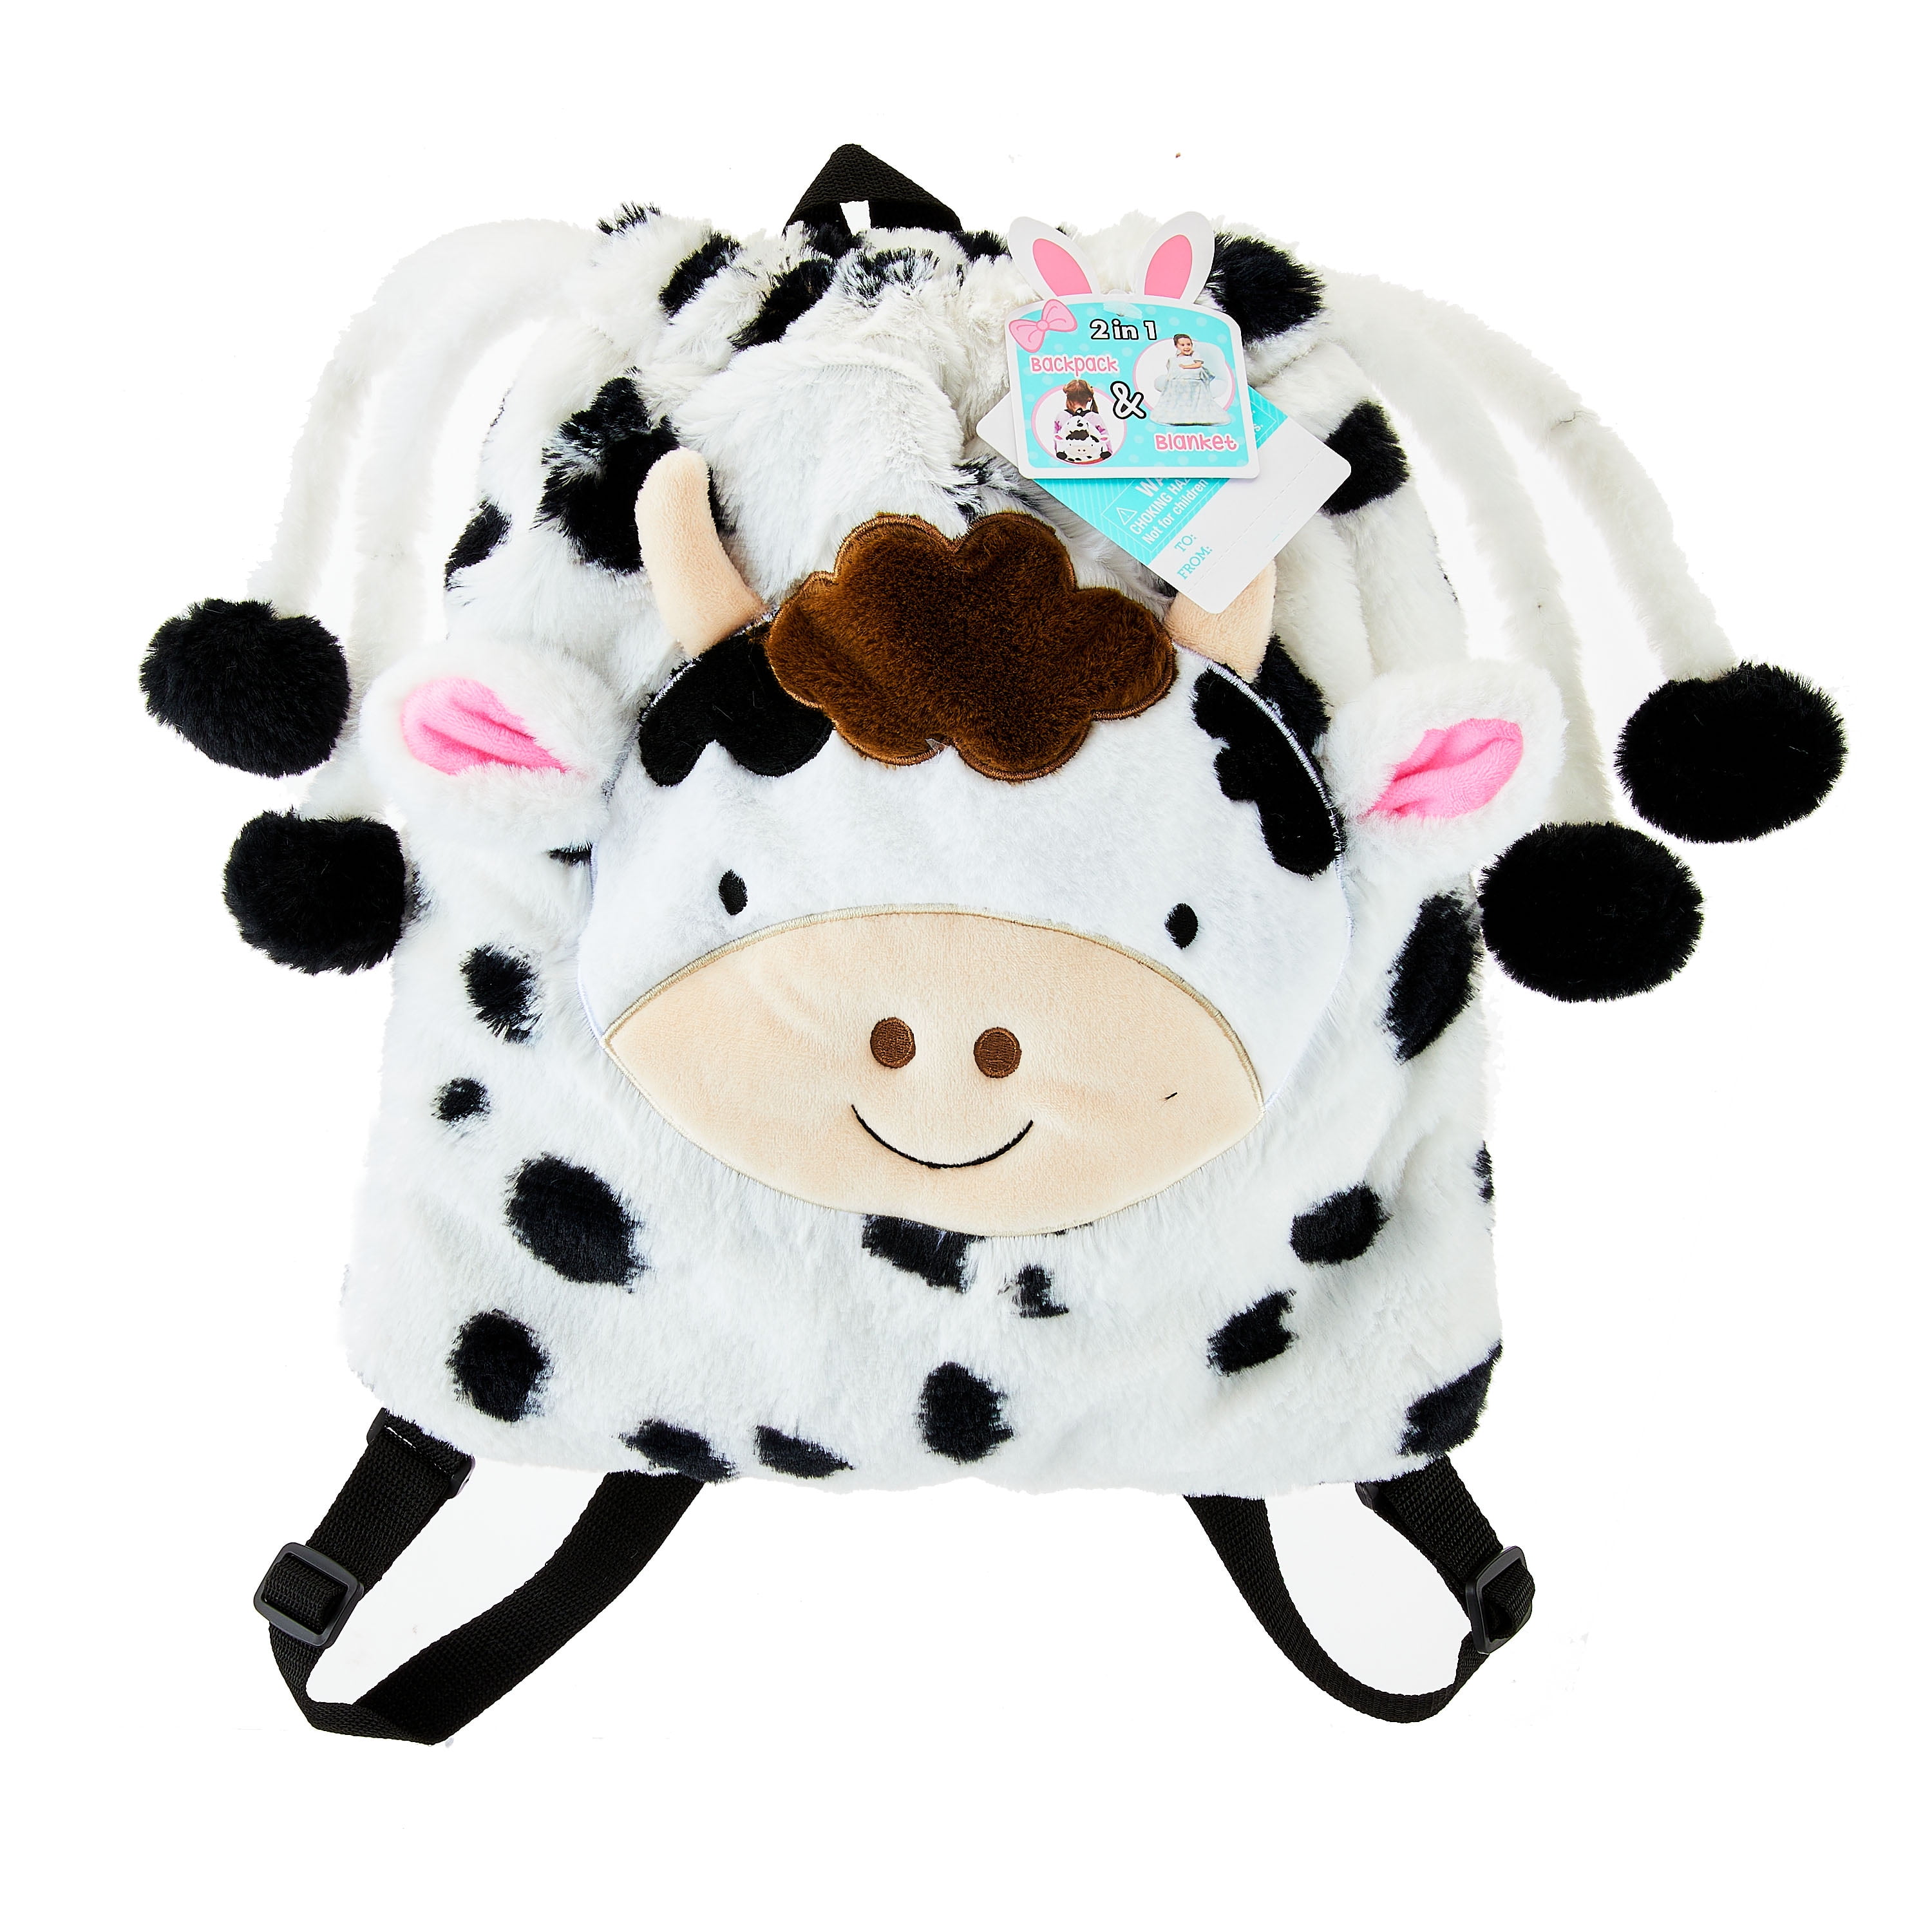 Way To Celebrate Easter 13.5" Large Plush Cow Backpack with Plush Blanket